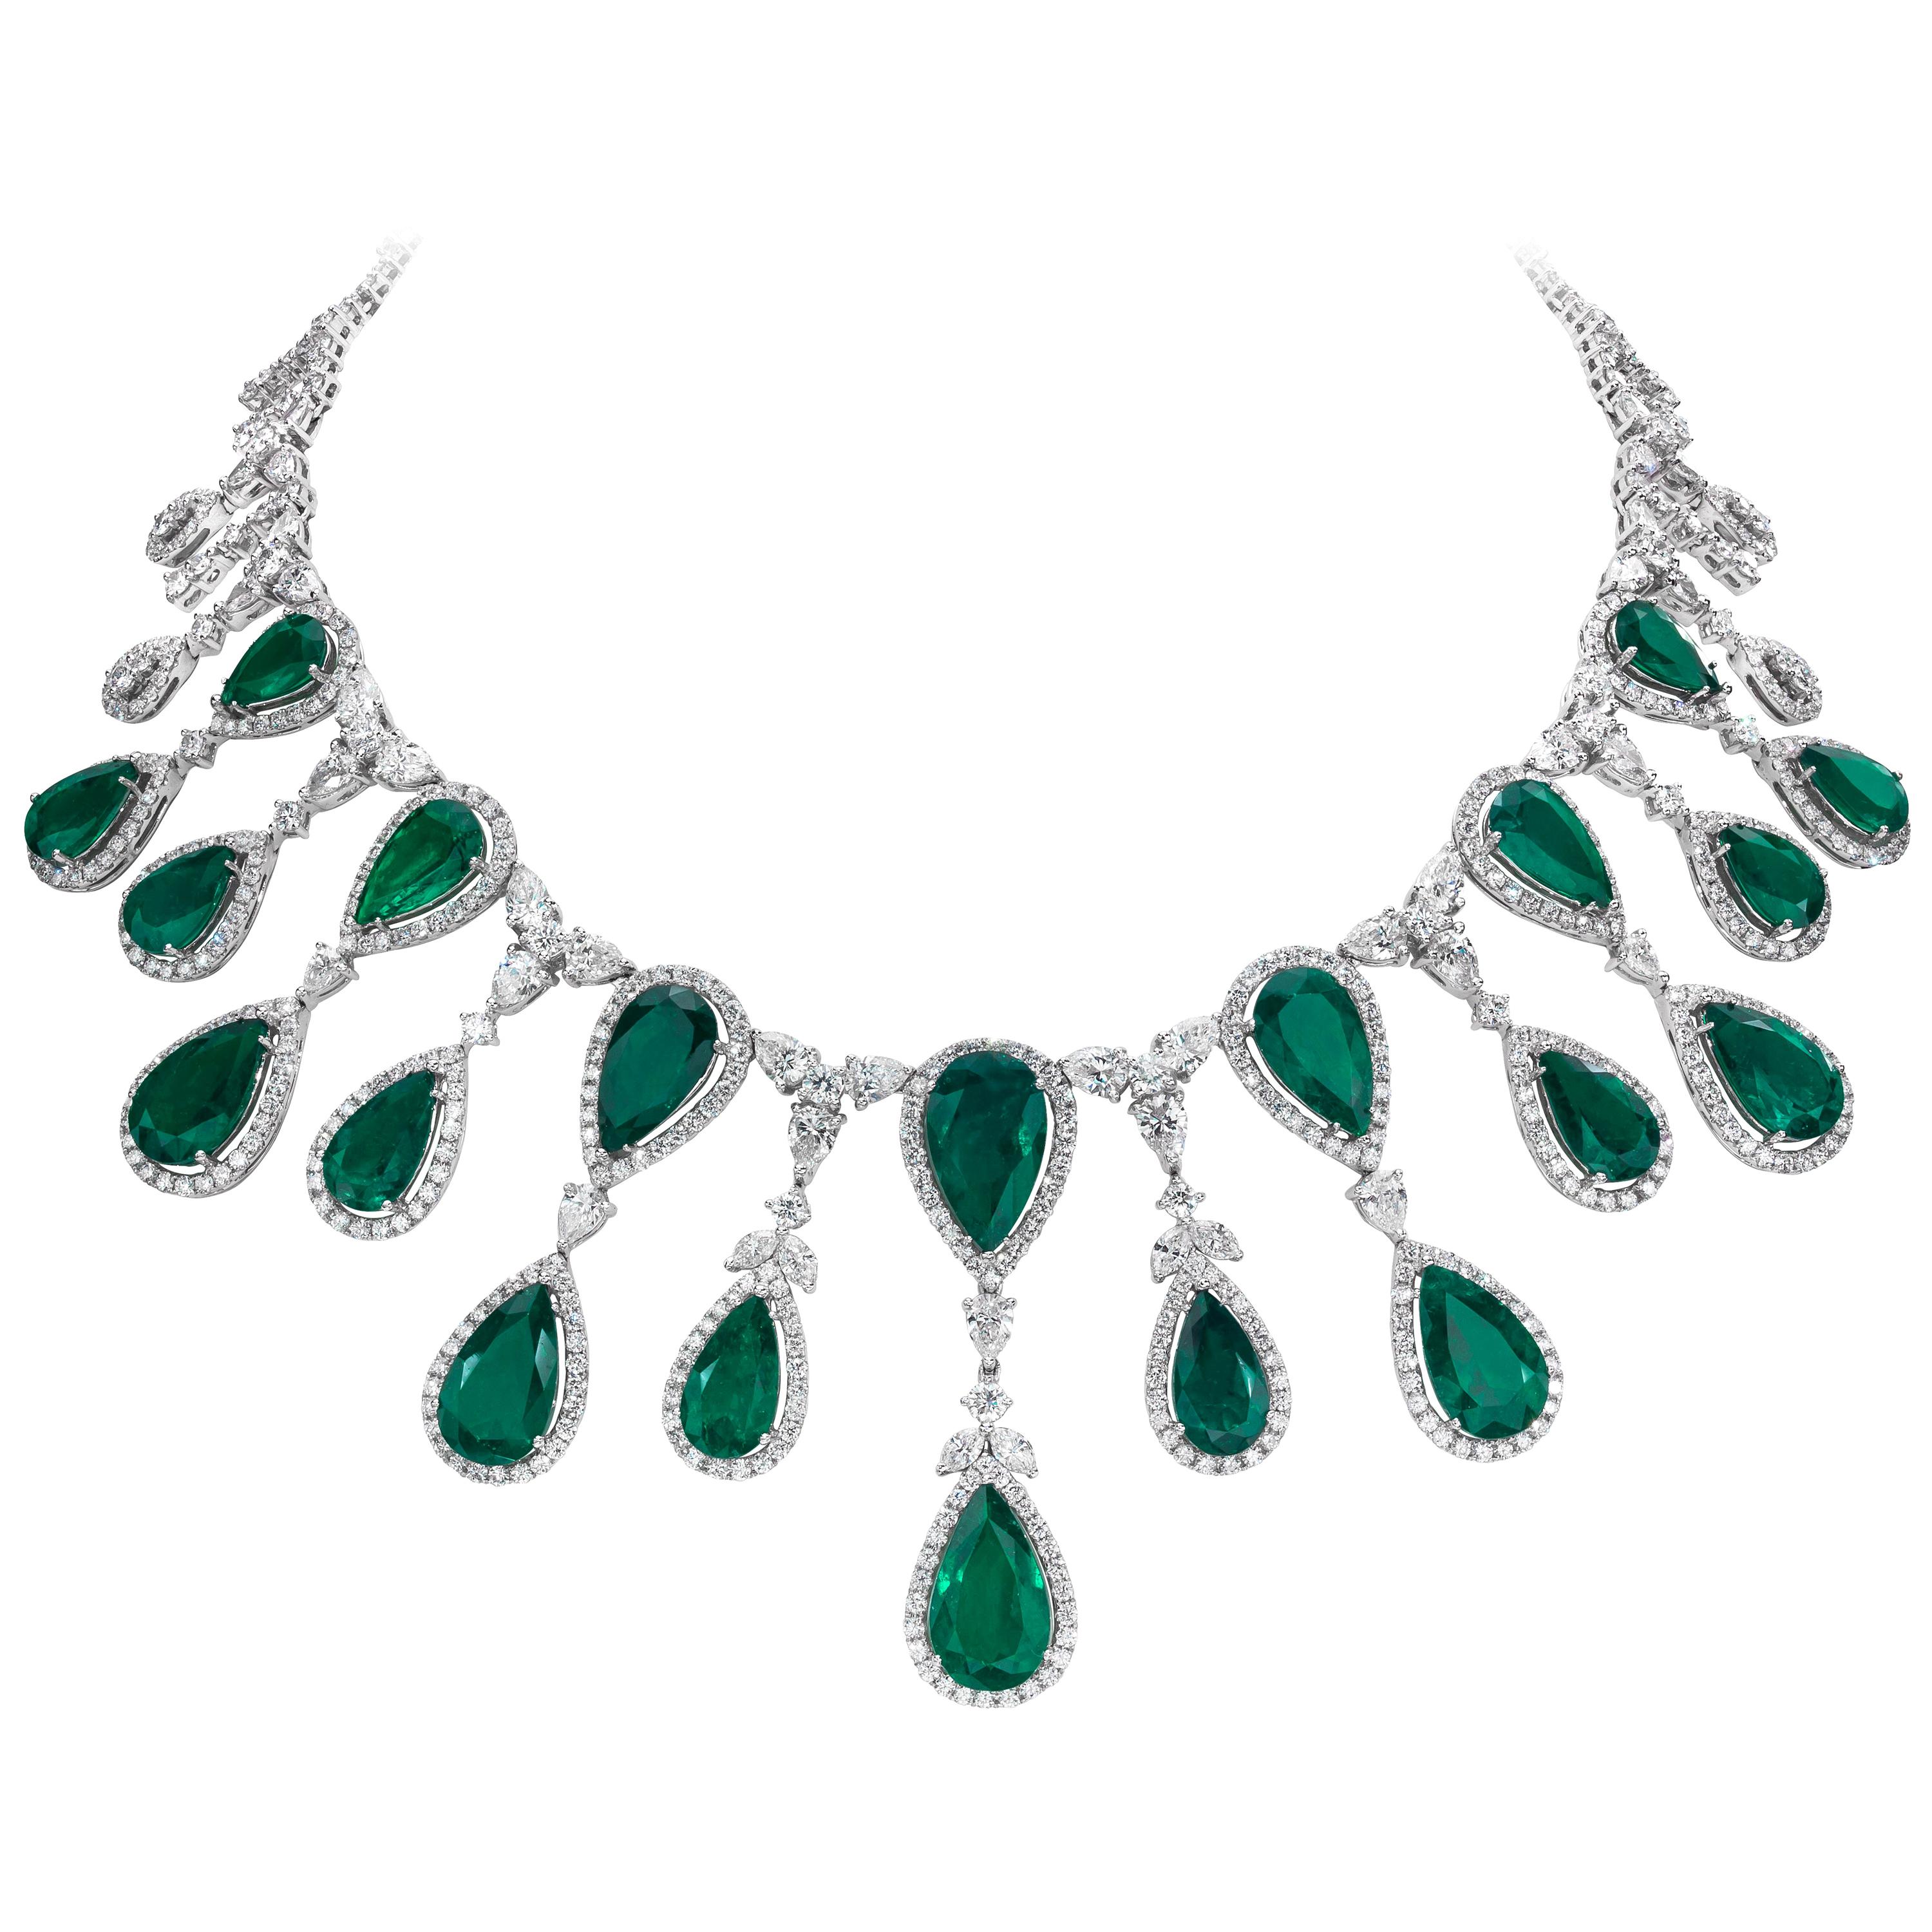 63.40 Carats Total Pear Shape Colombian Green Emerald and Diamond Necklace